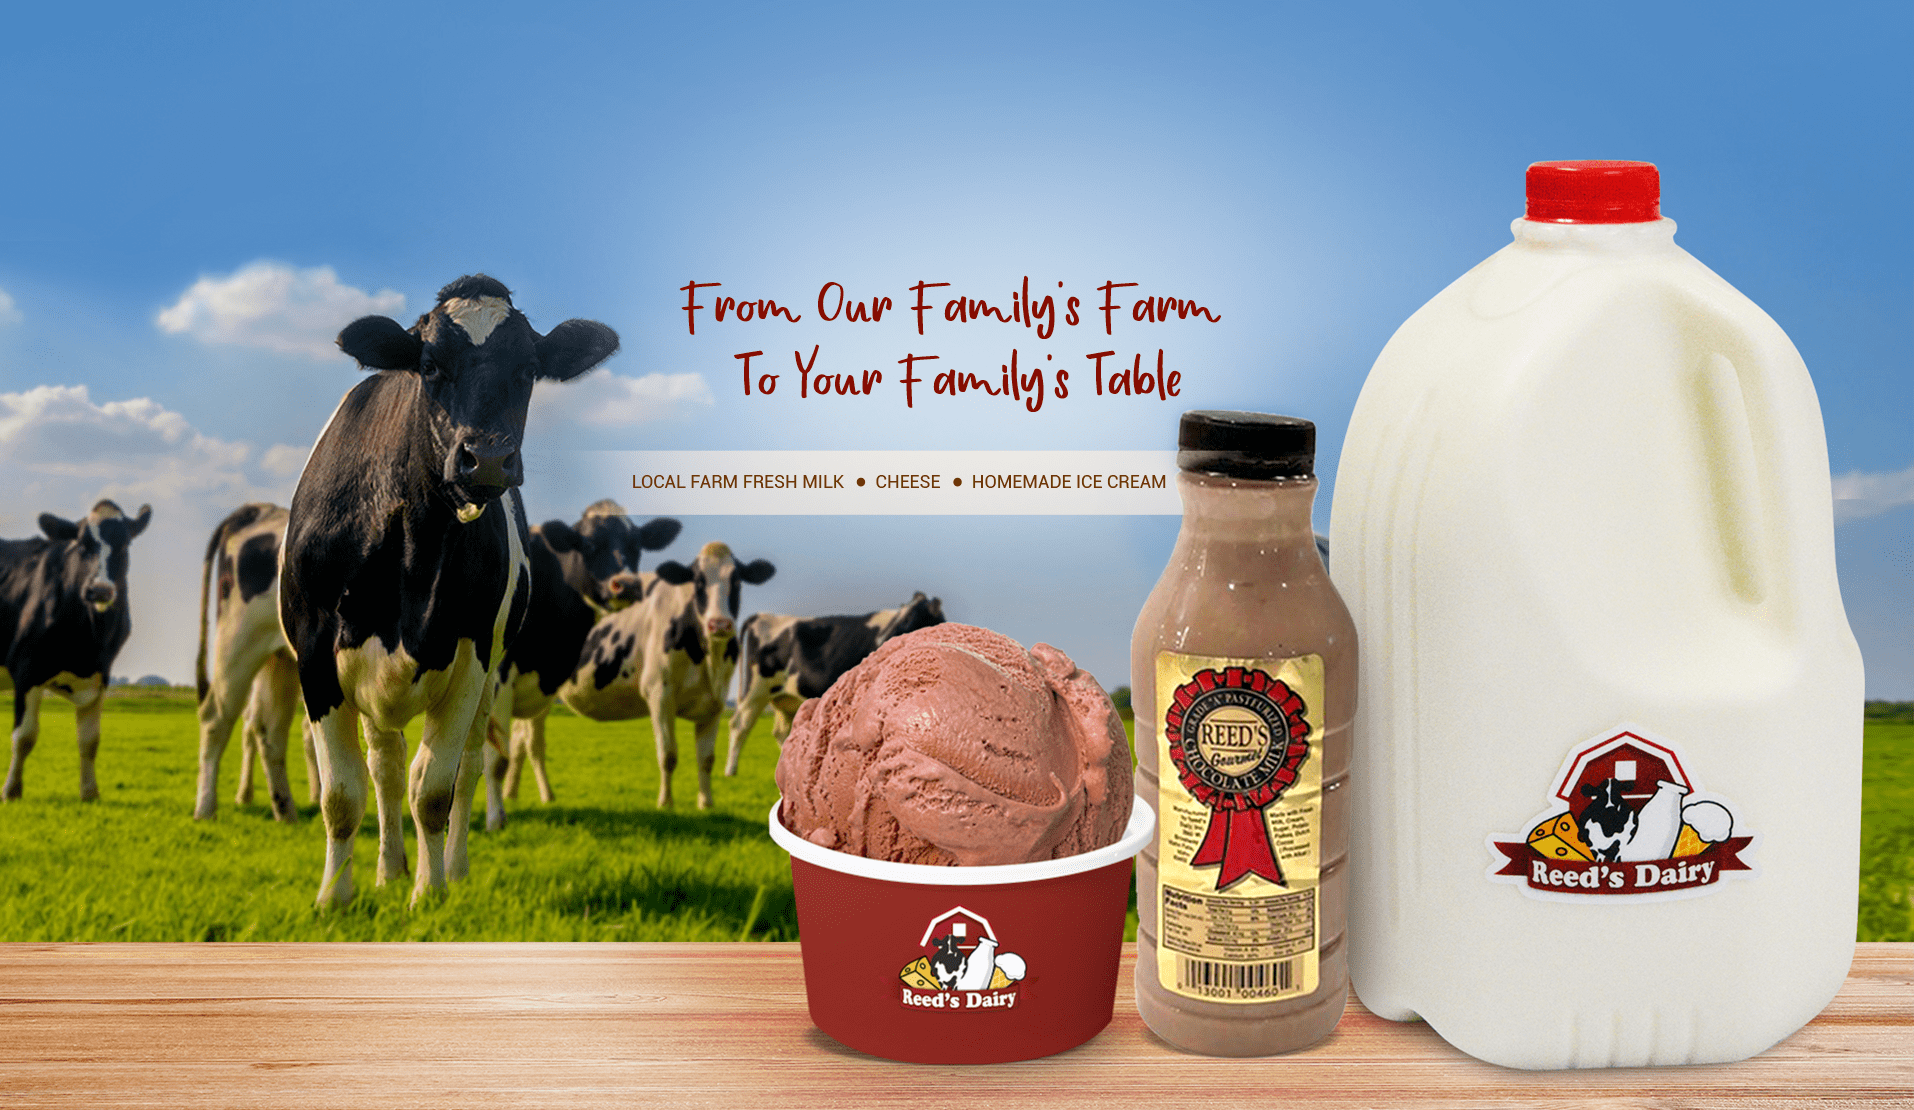 From Our Family's Farm To Your Family's Table